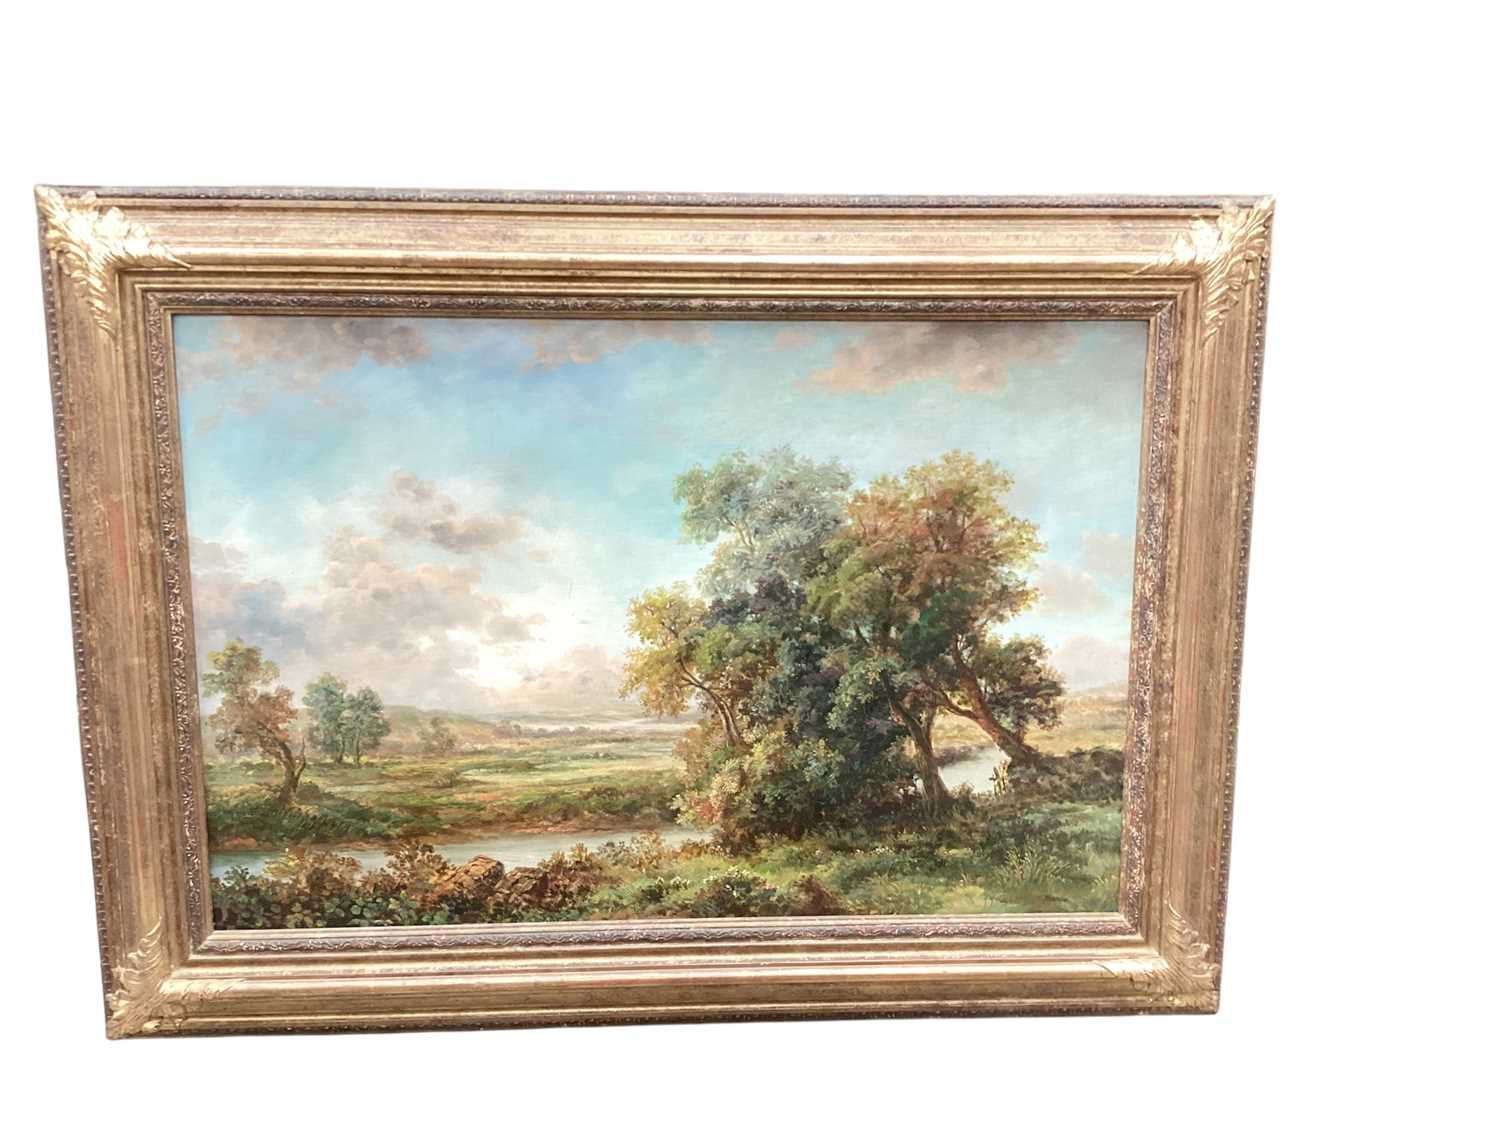 Victorian-style oil on canvas - Rural Landscape, in gilt frame - Image 3 of 4